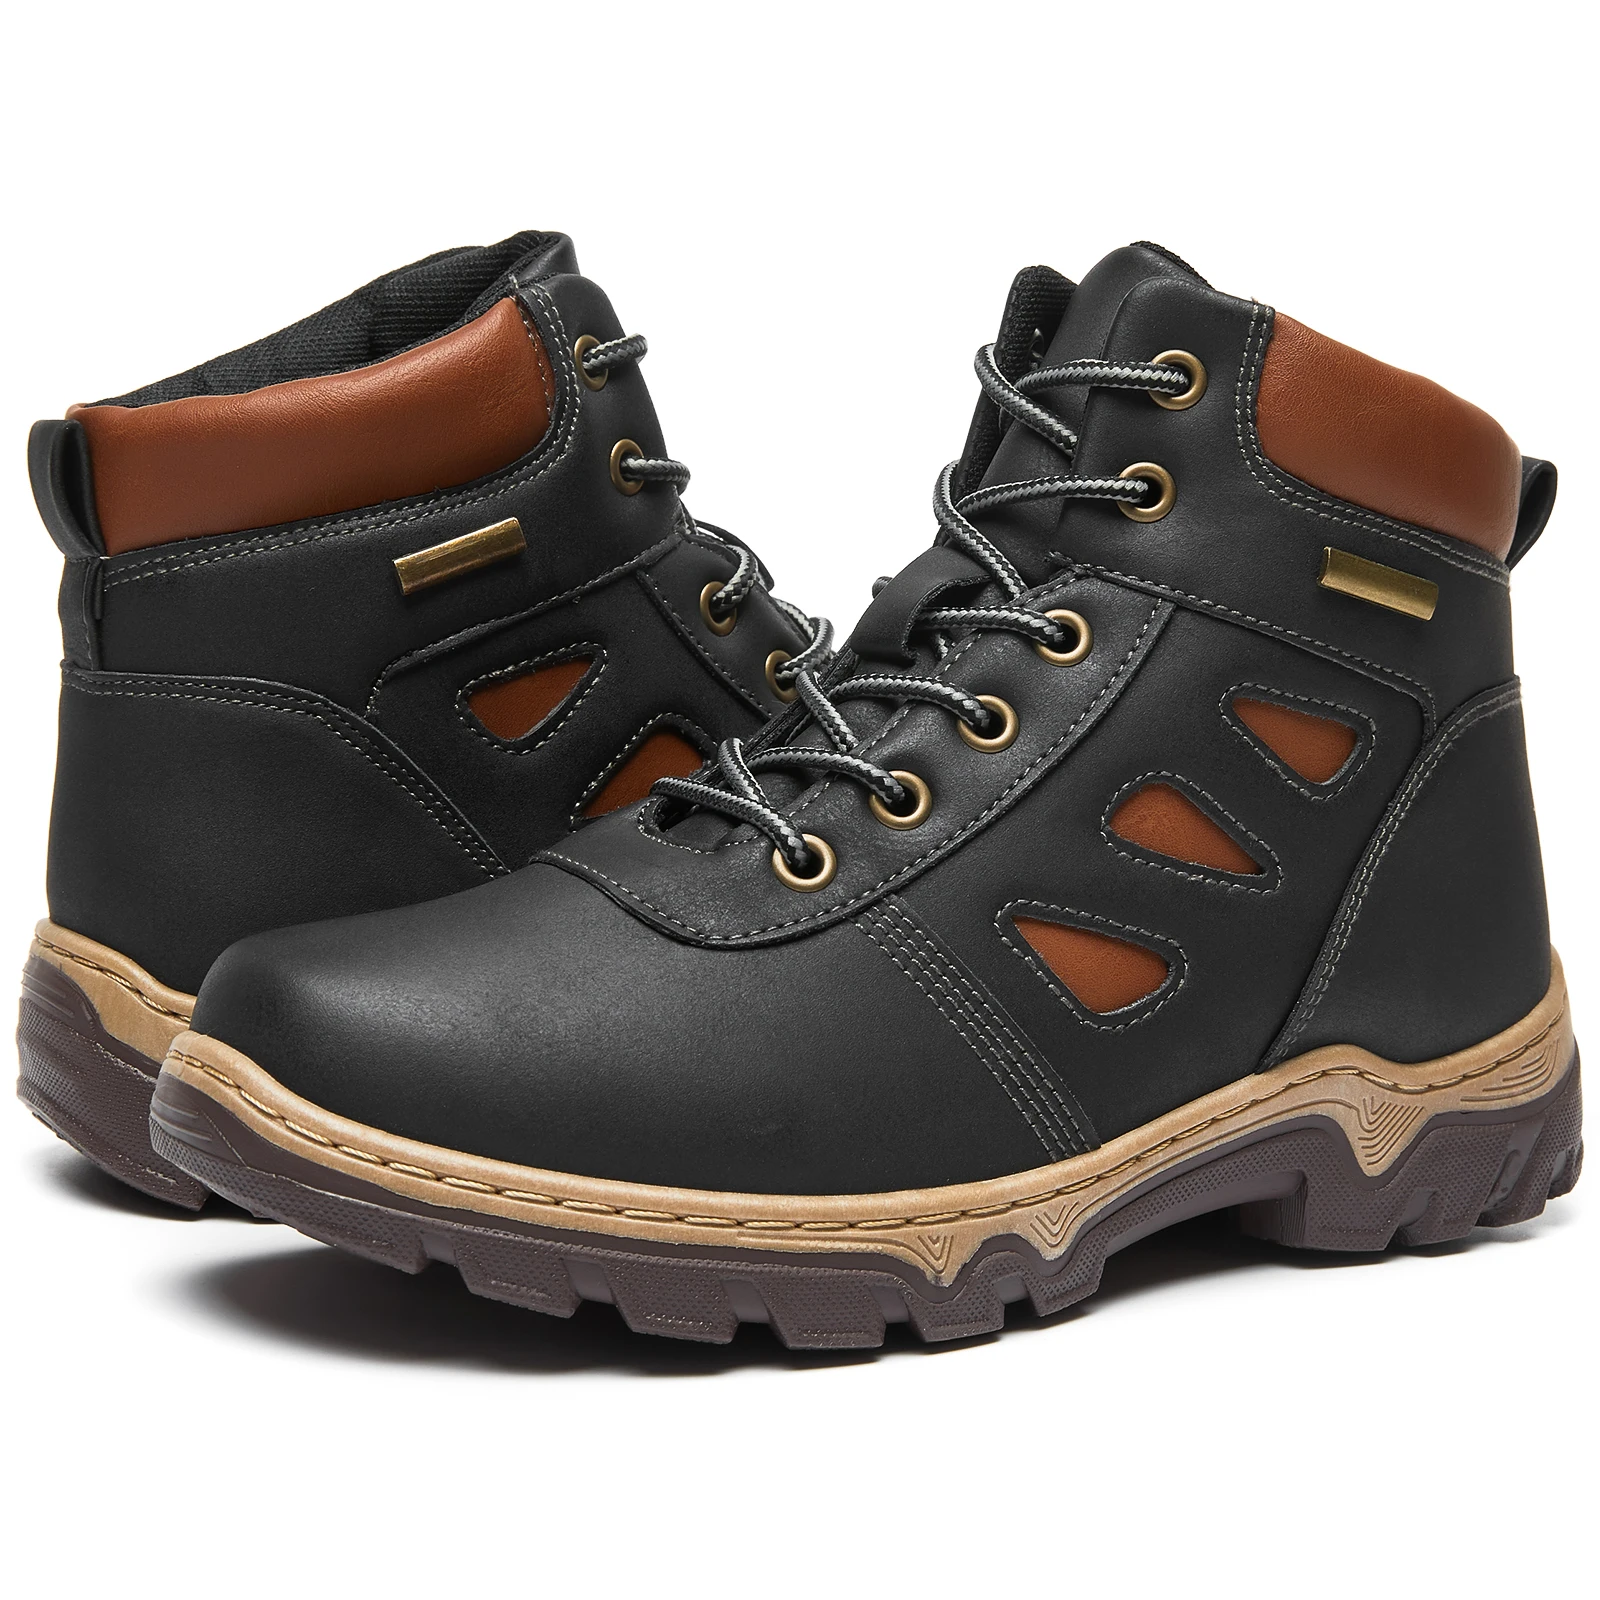 New Design Women's Waterproof Hiking Boots Outdoor Shoes Black and Brown Leather Ankle Boots Lace Up Boots for women